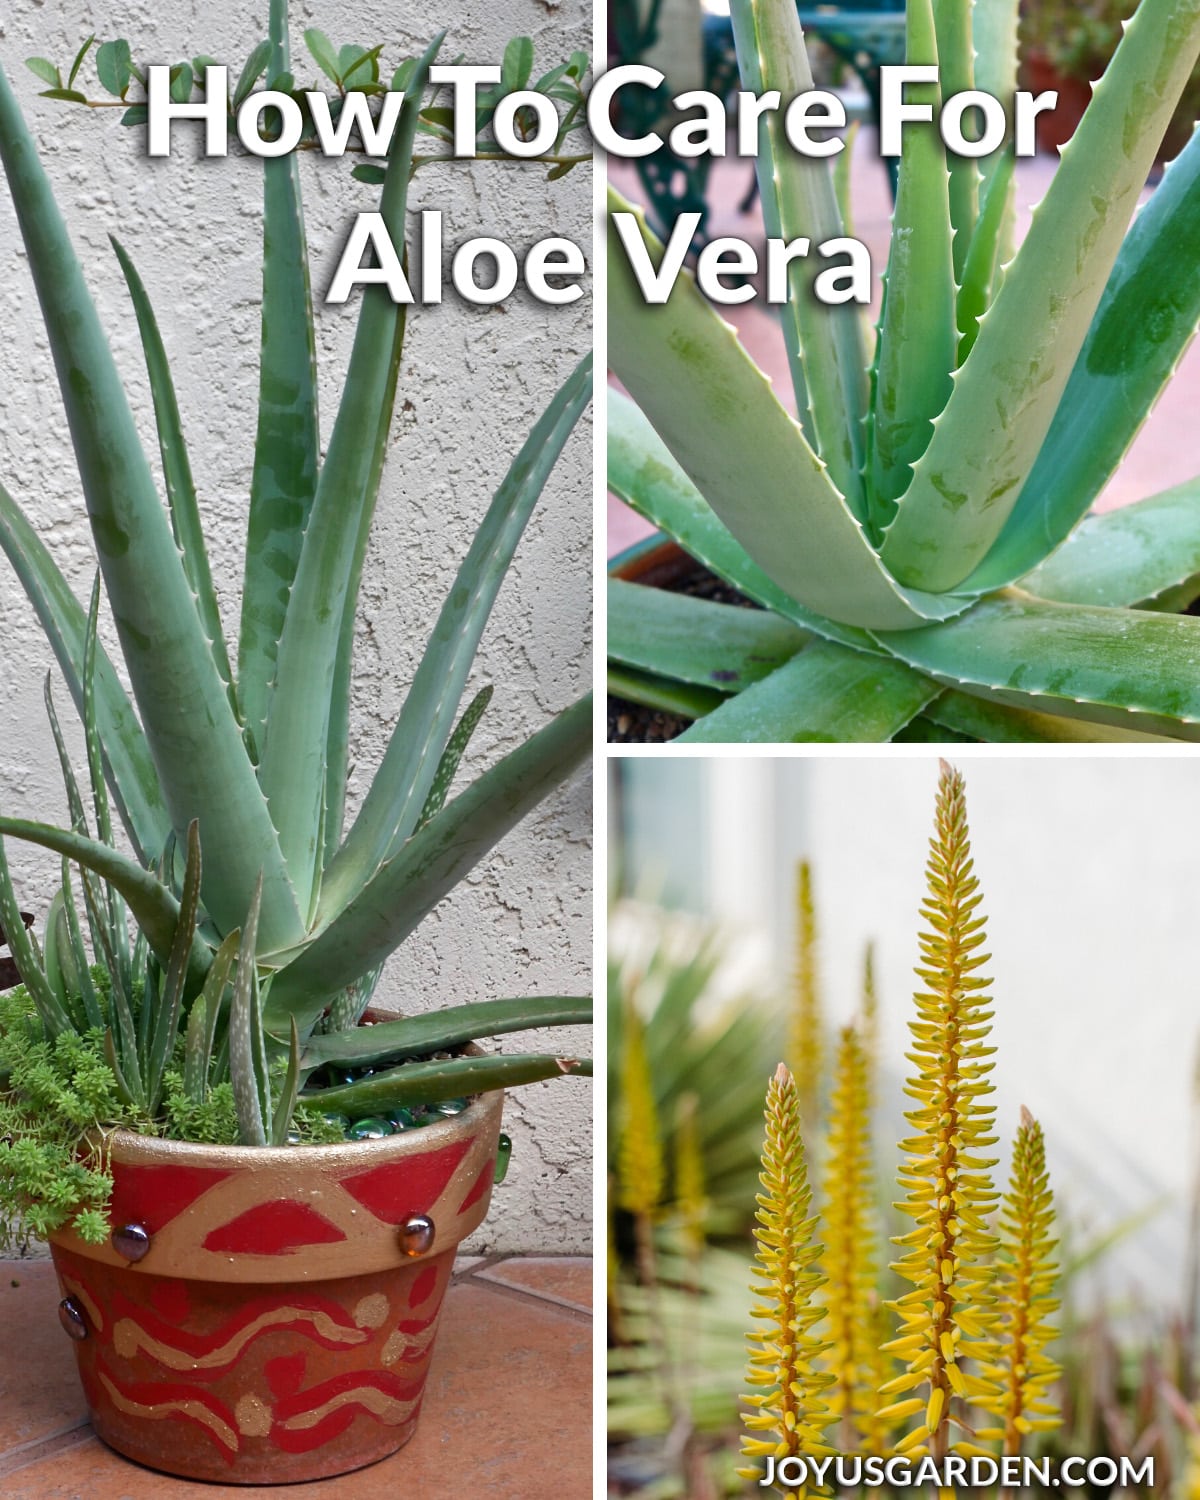 Aloe vera plant how to care for